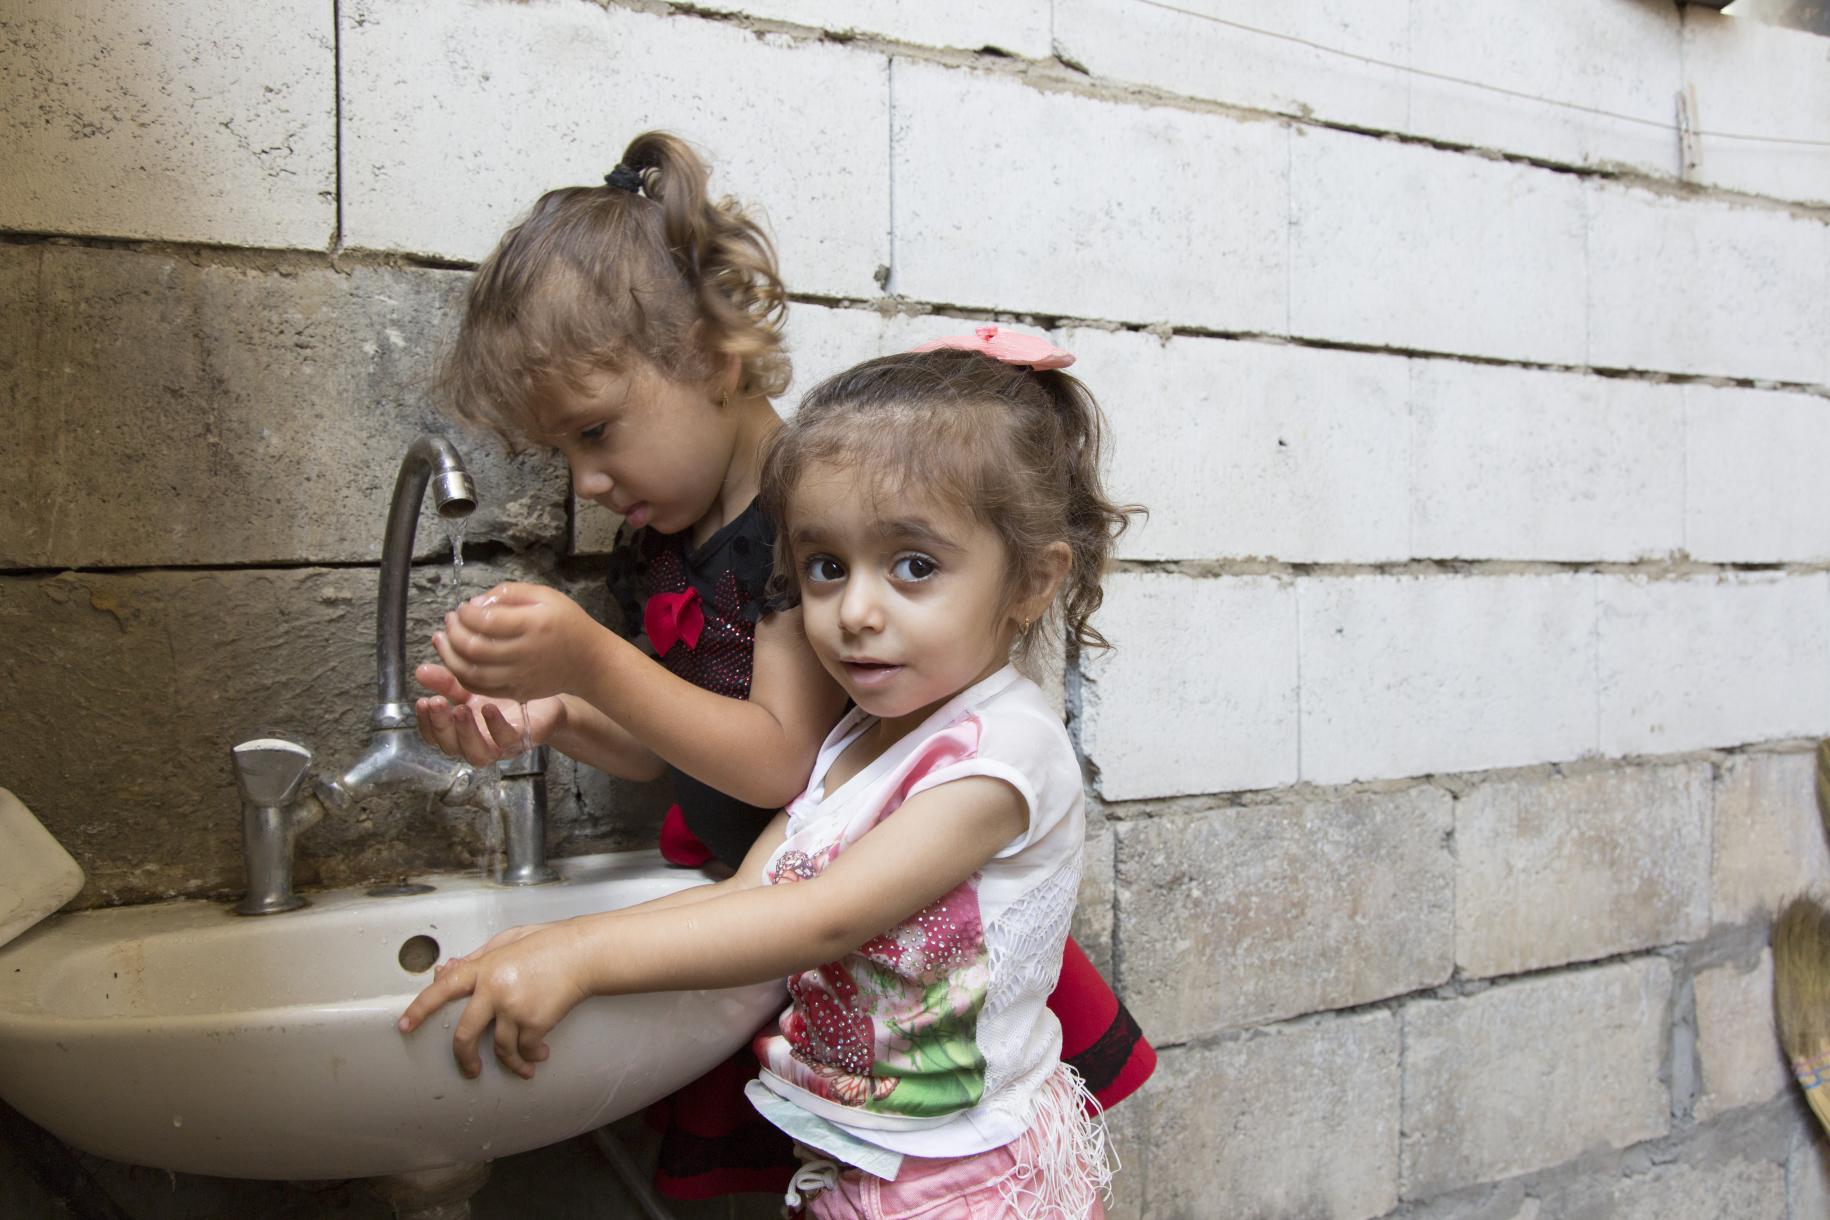 Two little girls washing their hands in an outdoor sink.